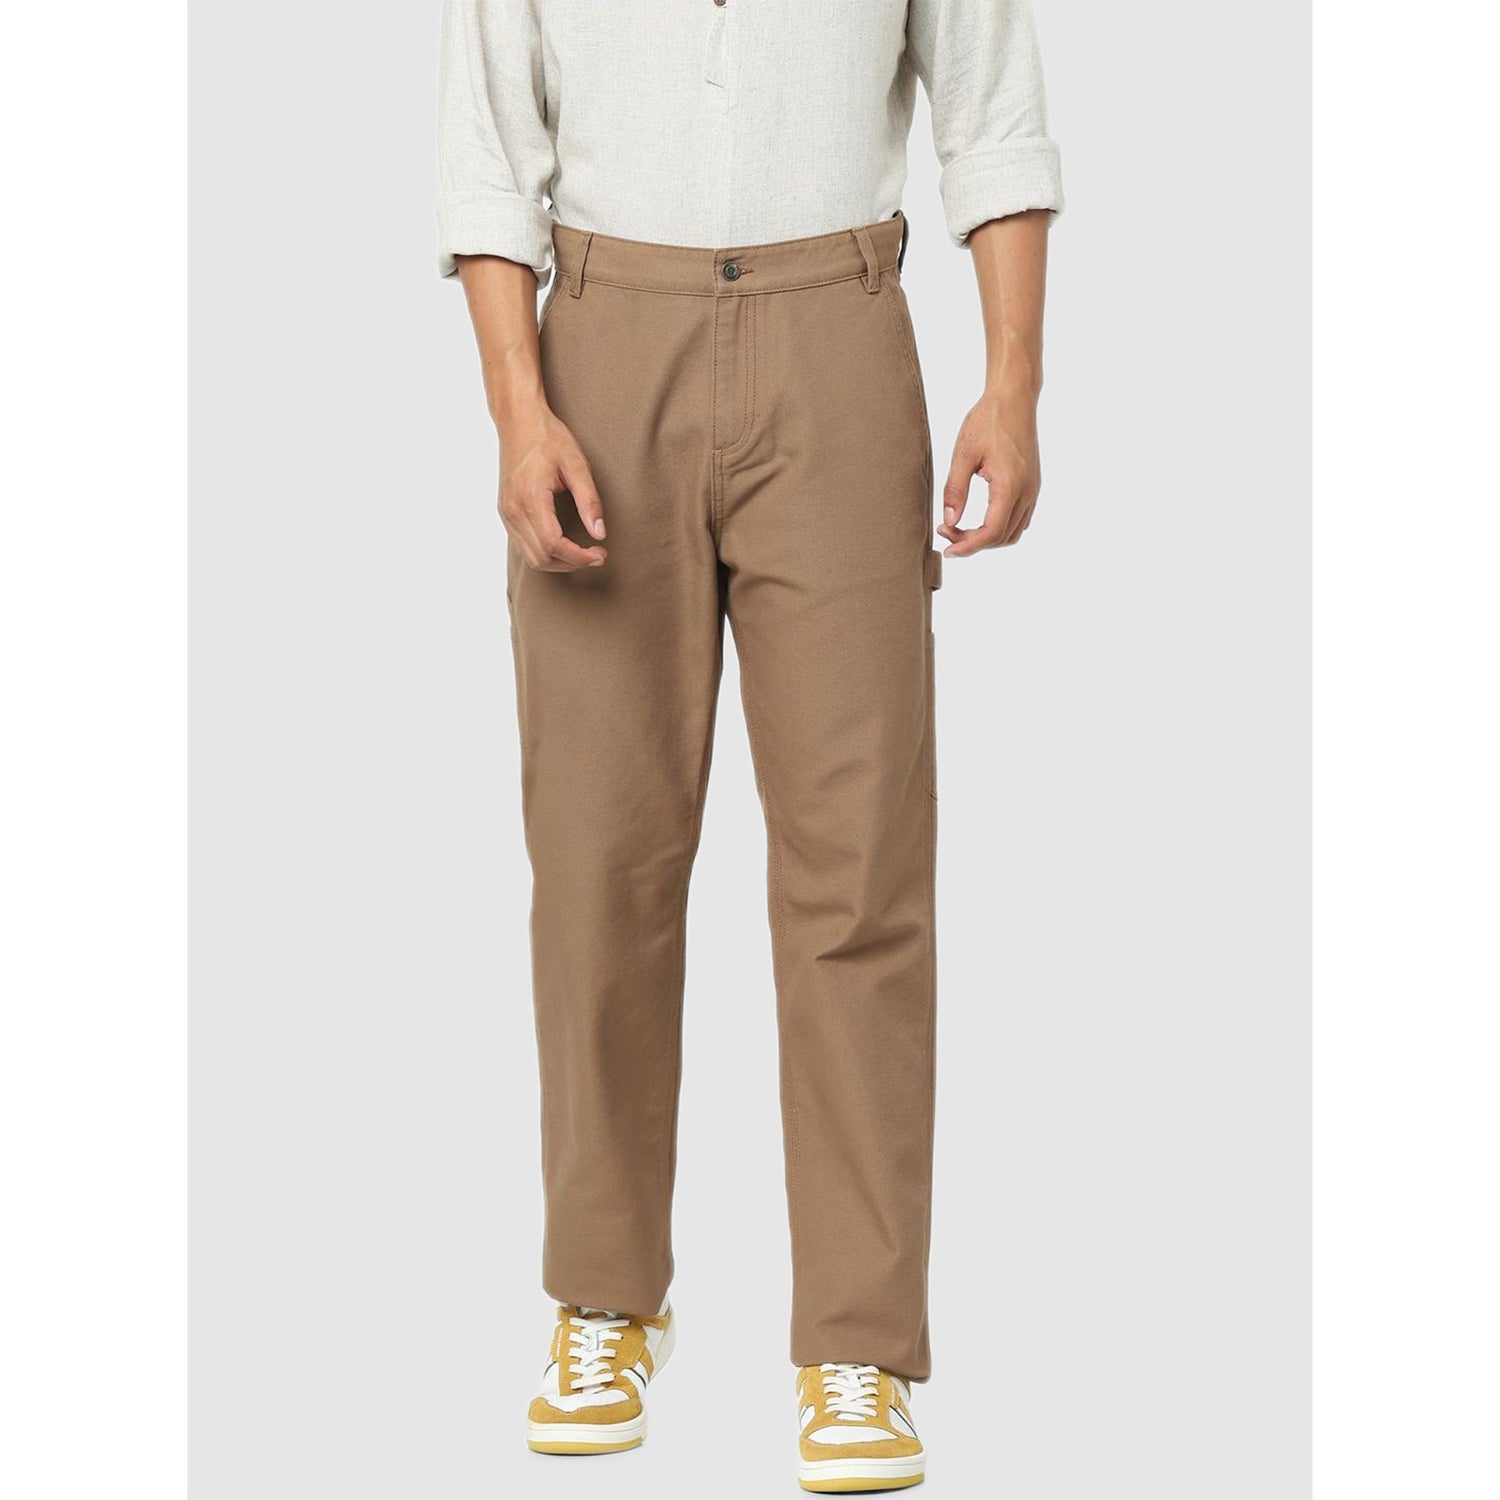 Brown Solid Regular Fit Trousers (Various Sizes)